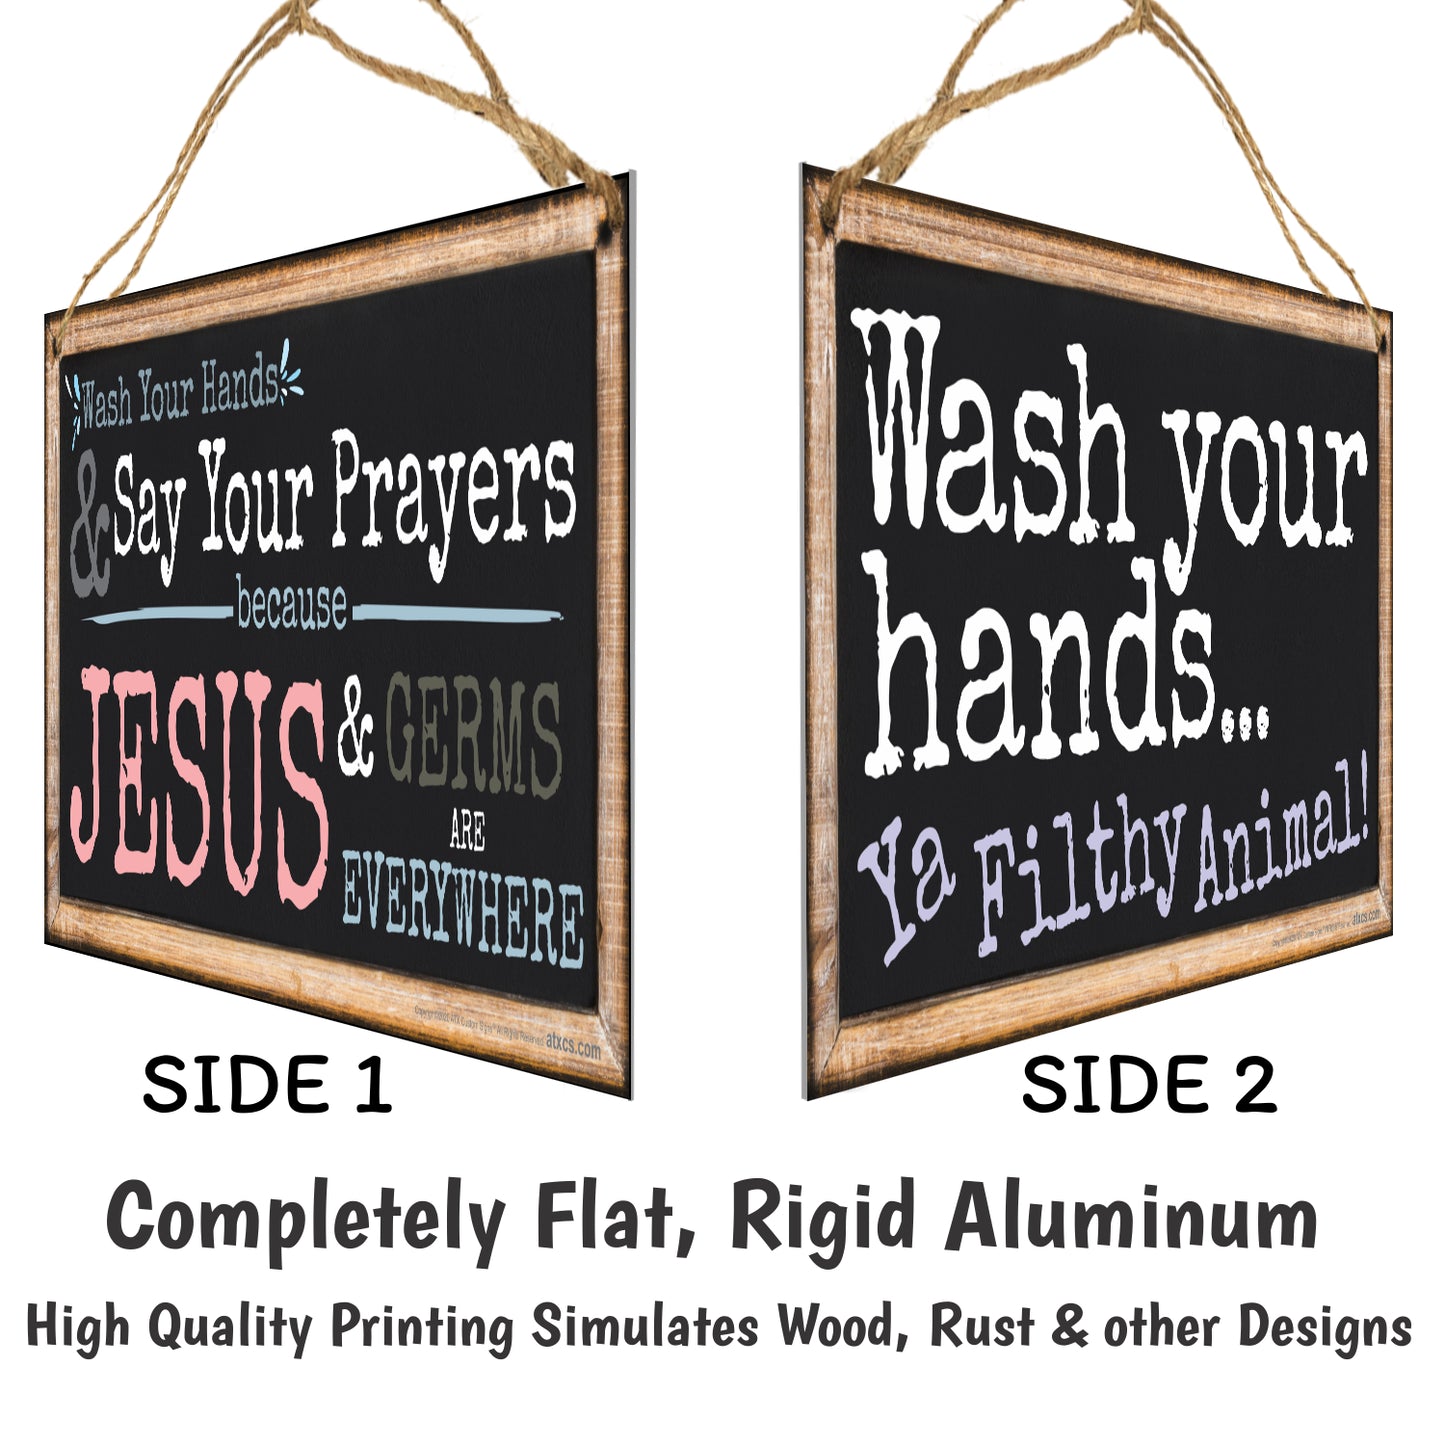 ATX CUSTOM SIGNS - Funny Double Sided Bathroom Sign - Wash Your Hands and Say Your Prayers because Jesus and Germs are Everywhere with Wash Your Hands... ya filthy animal!.